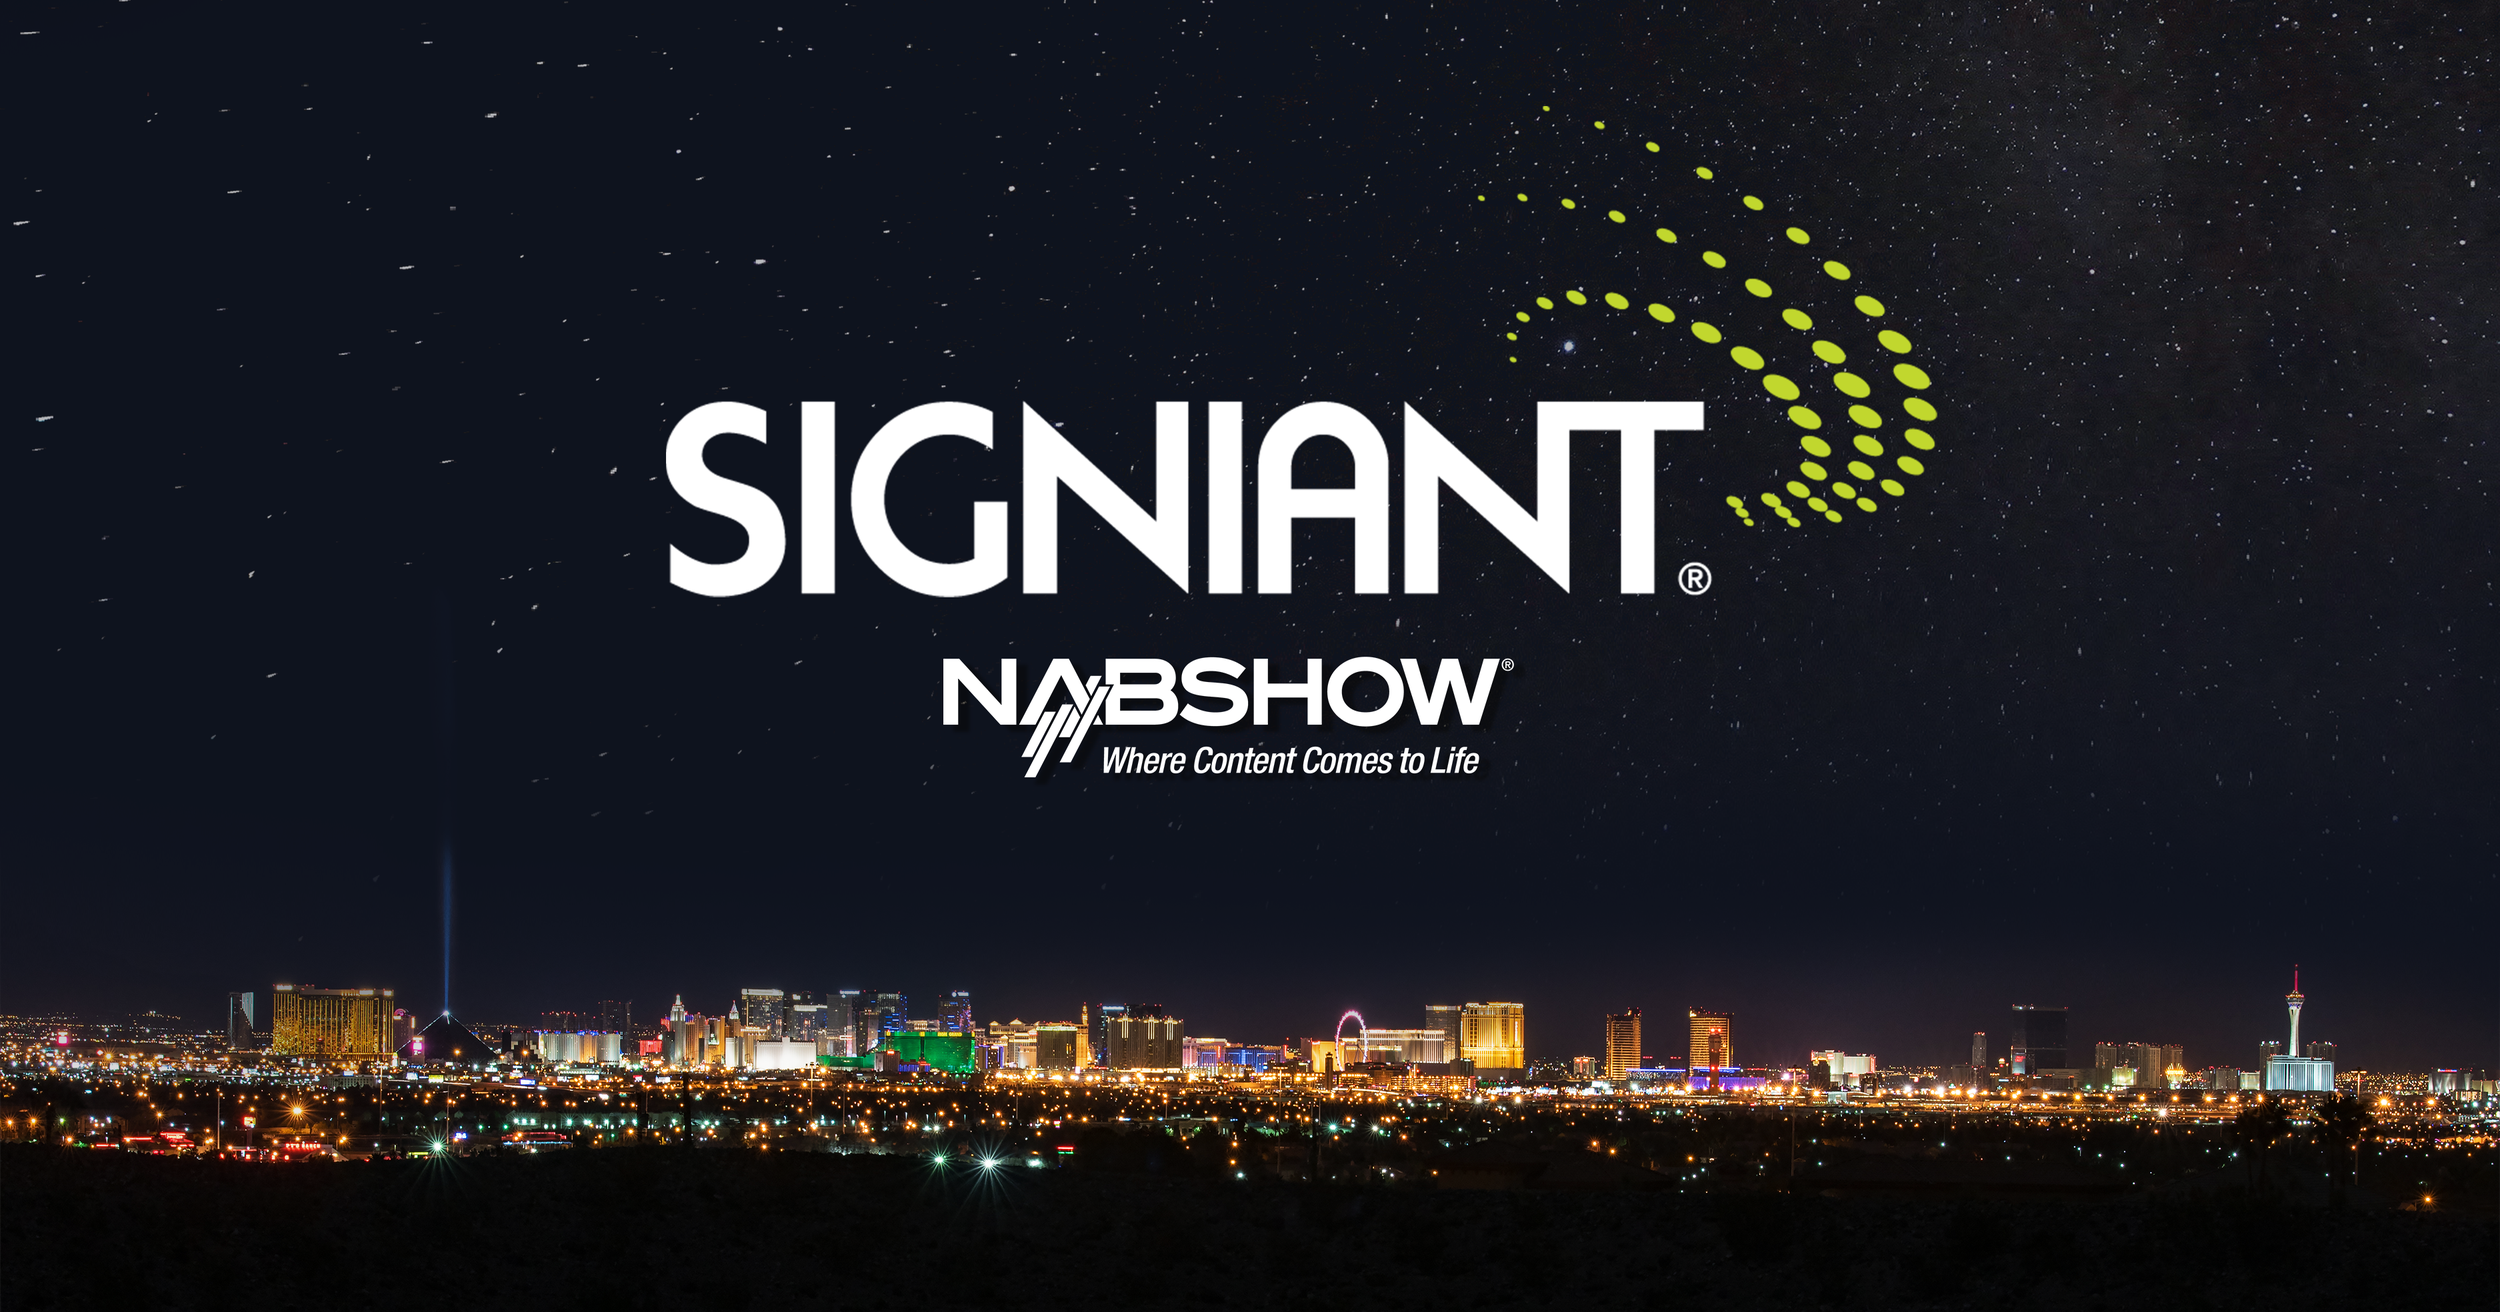 Signiant Nabshow logo with small city skyline at nighttime in background